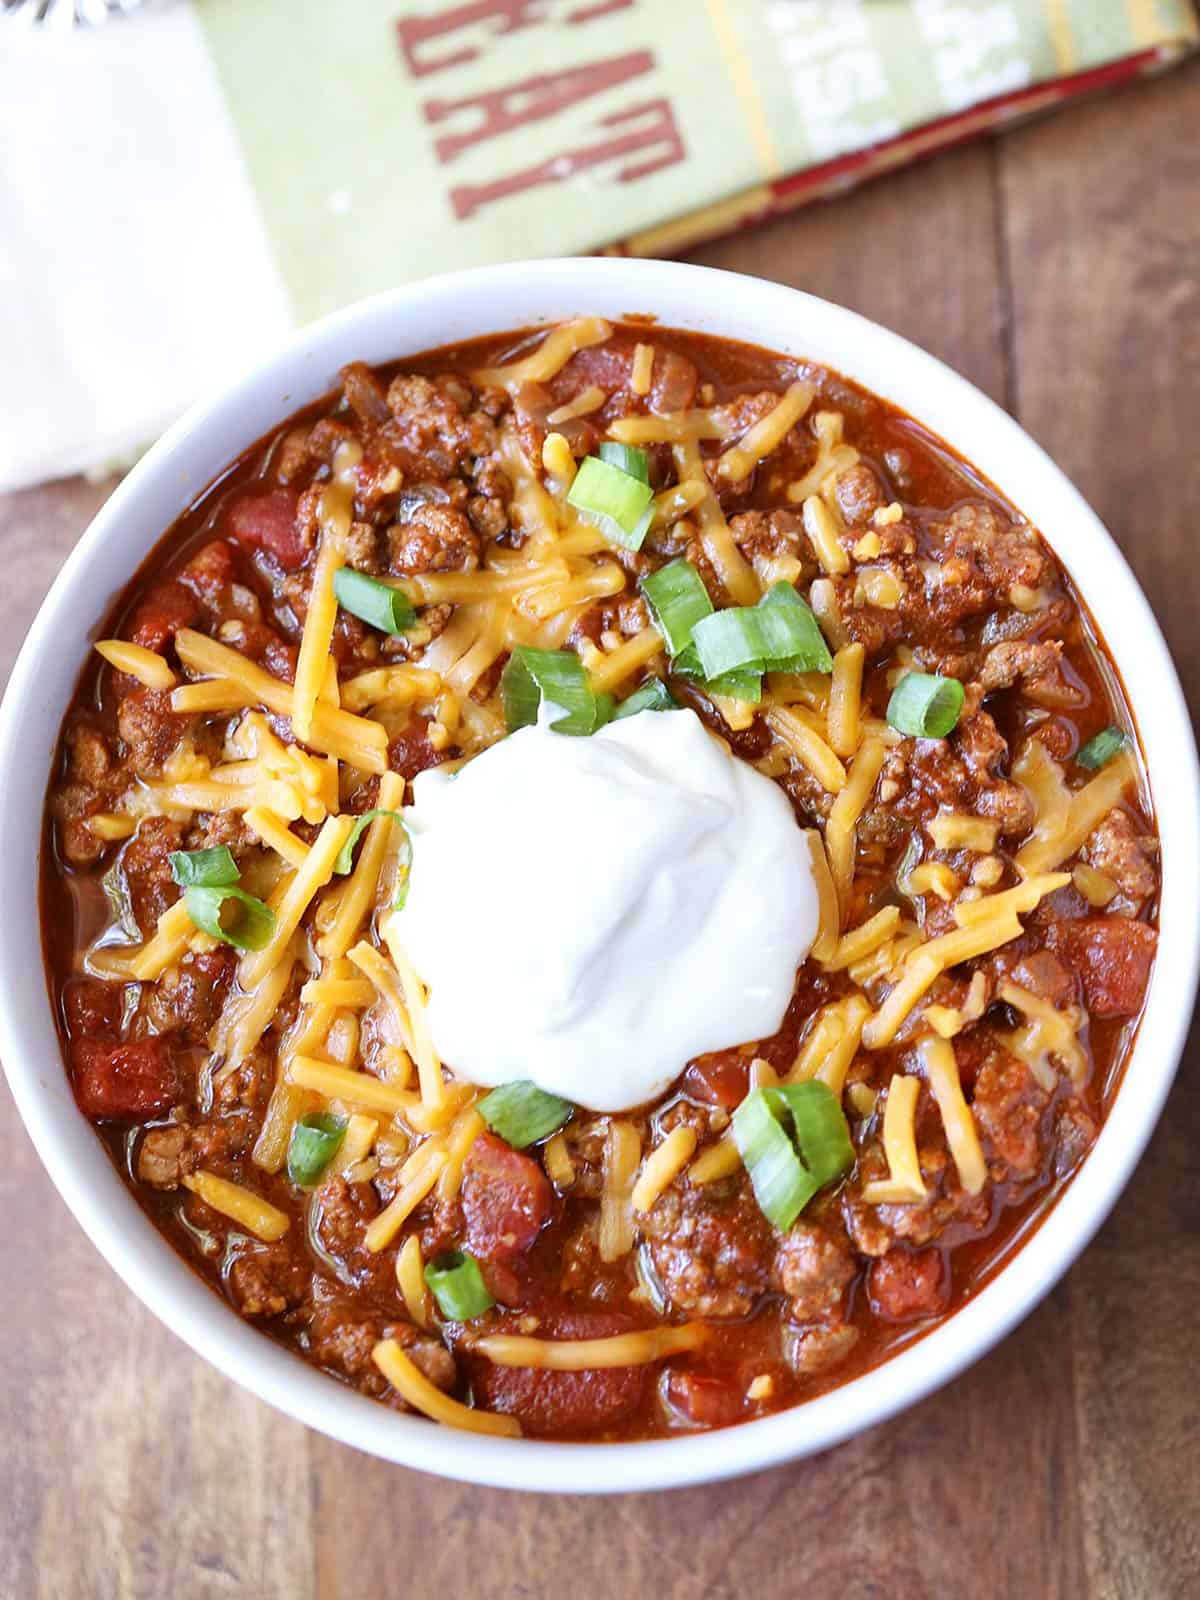 No-bean chili is served in a white bowl with a napkin.